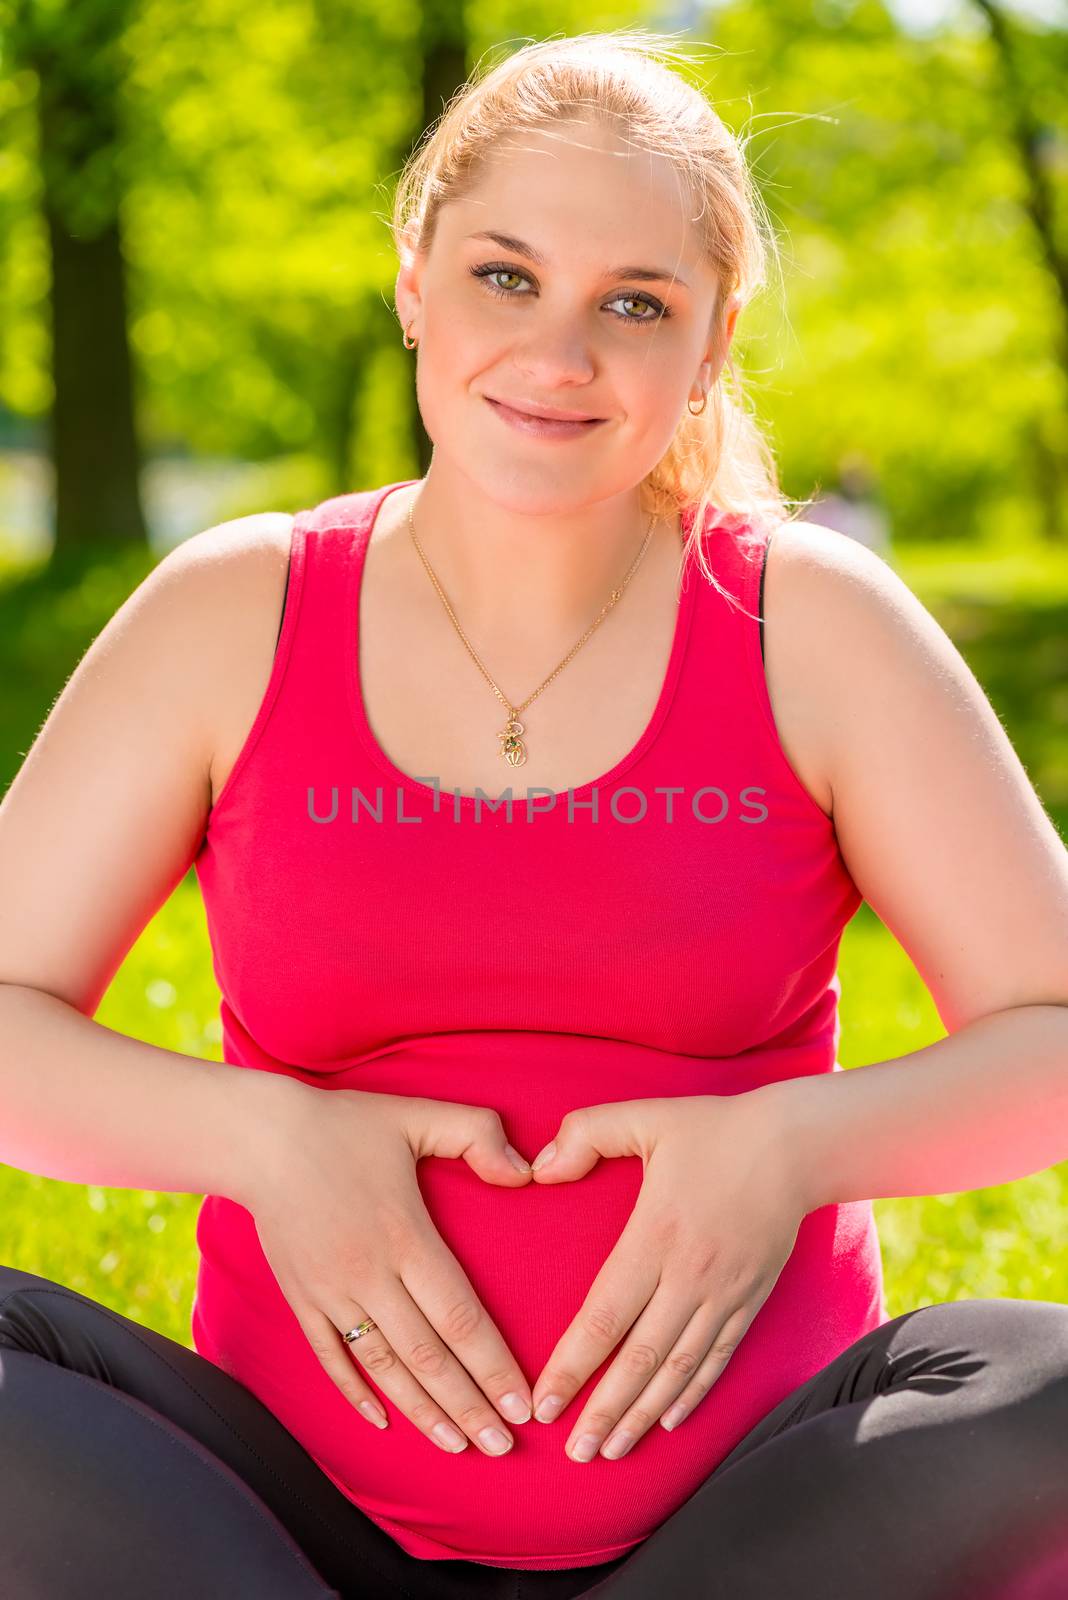 Vertical portrait of a happy expectant mother in the park